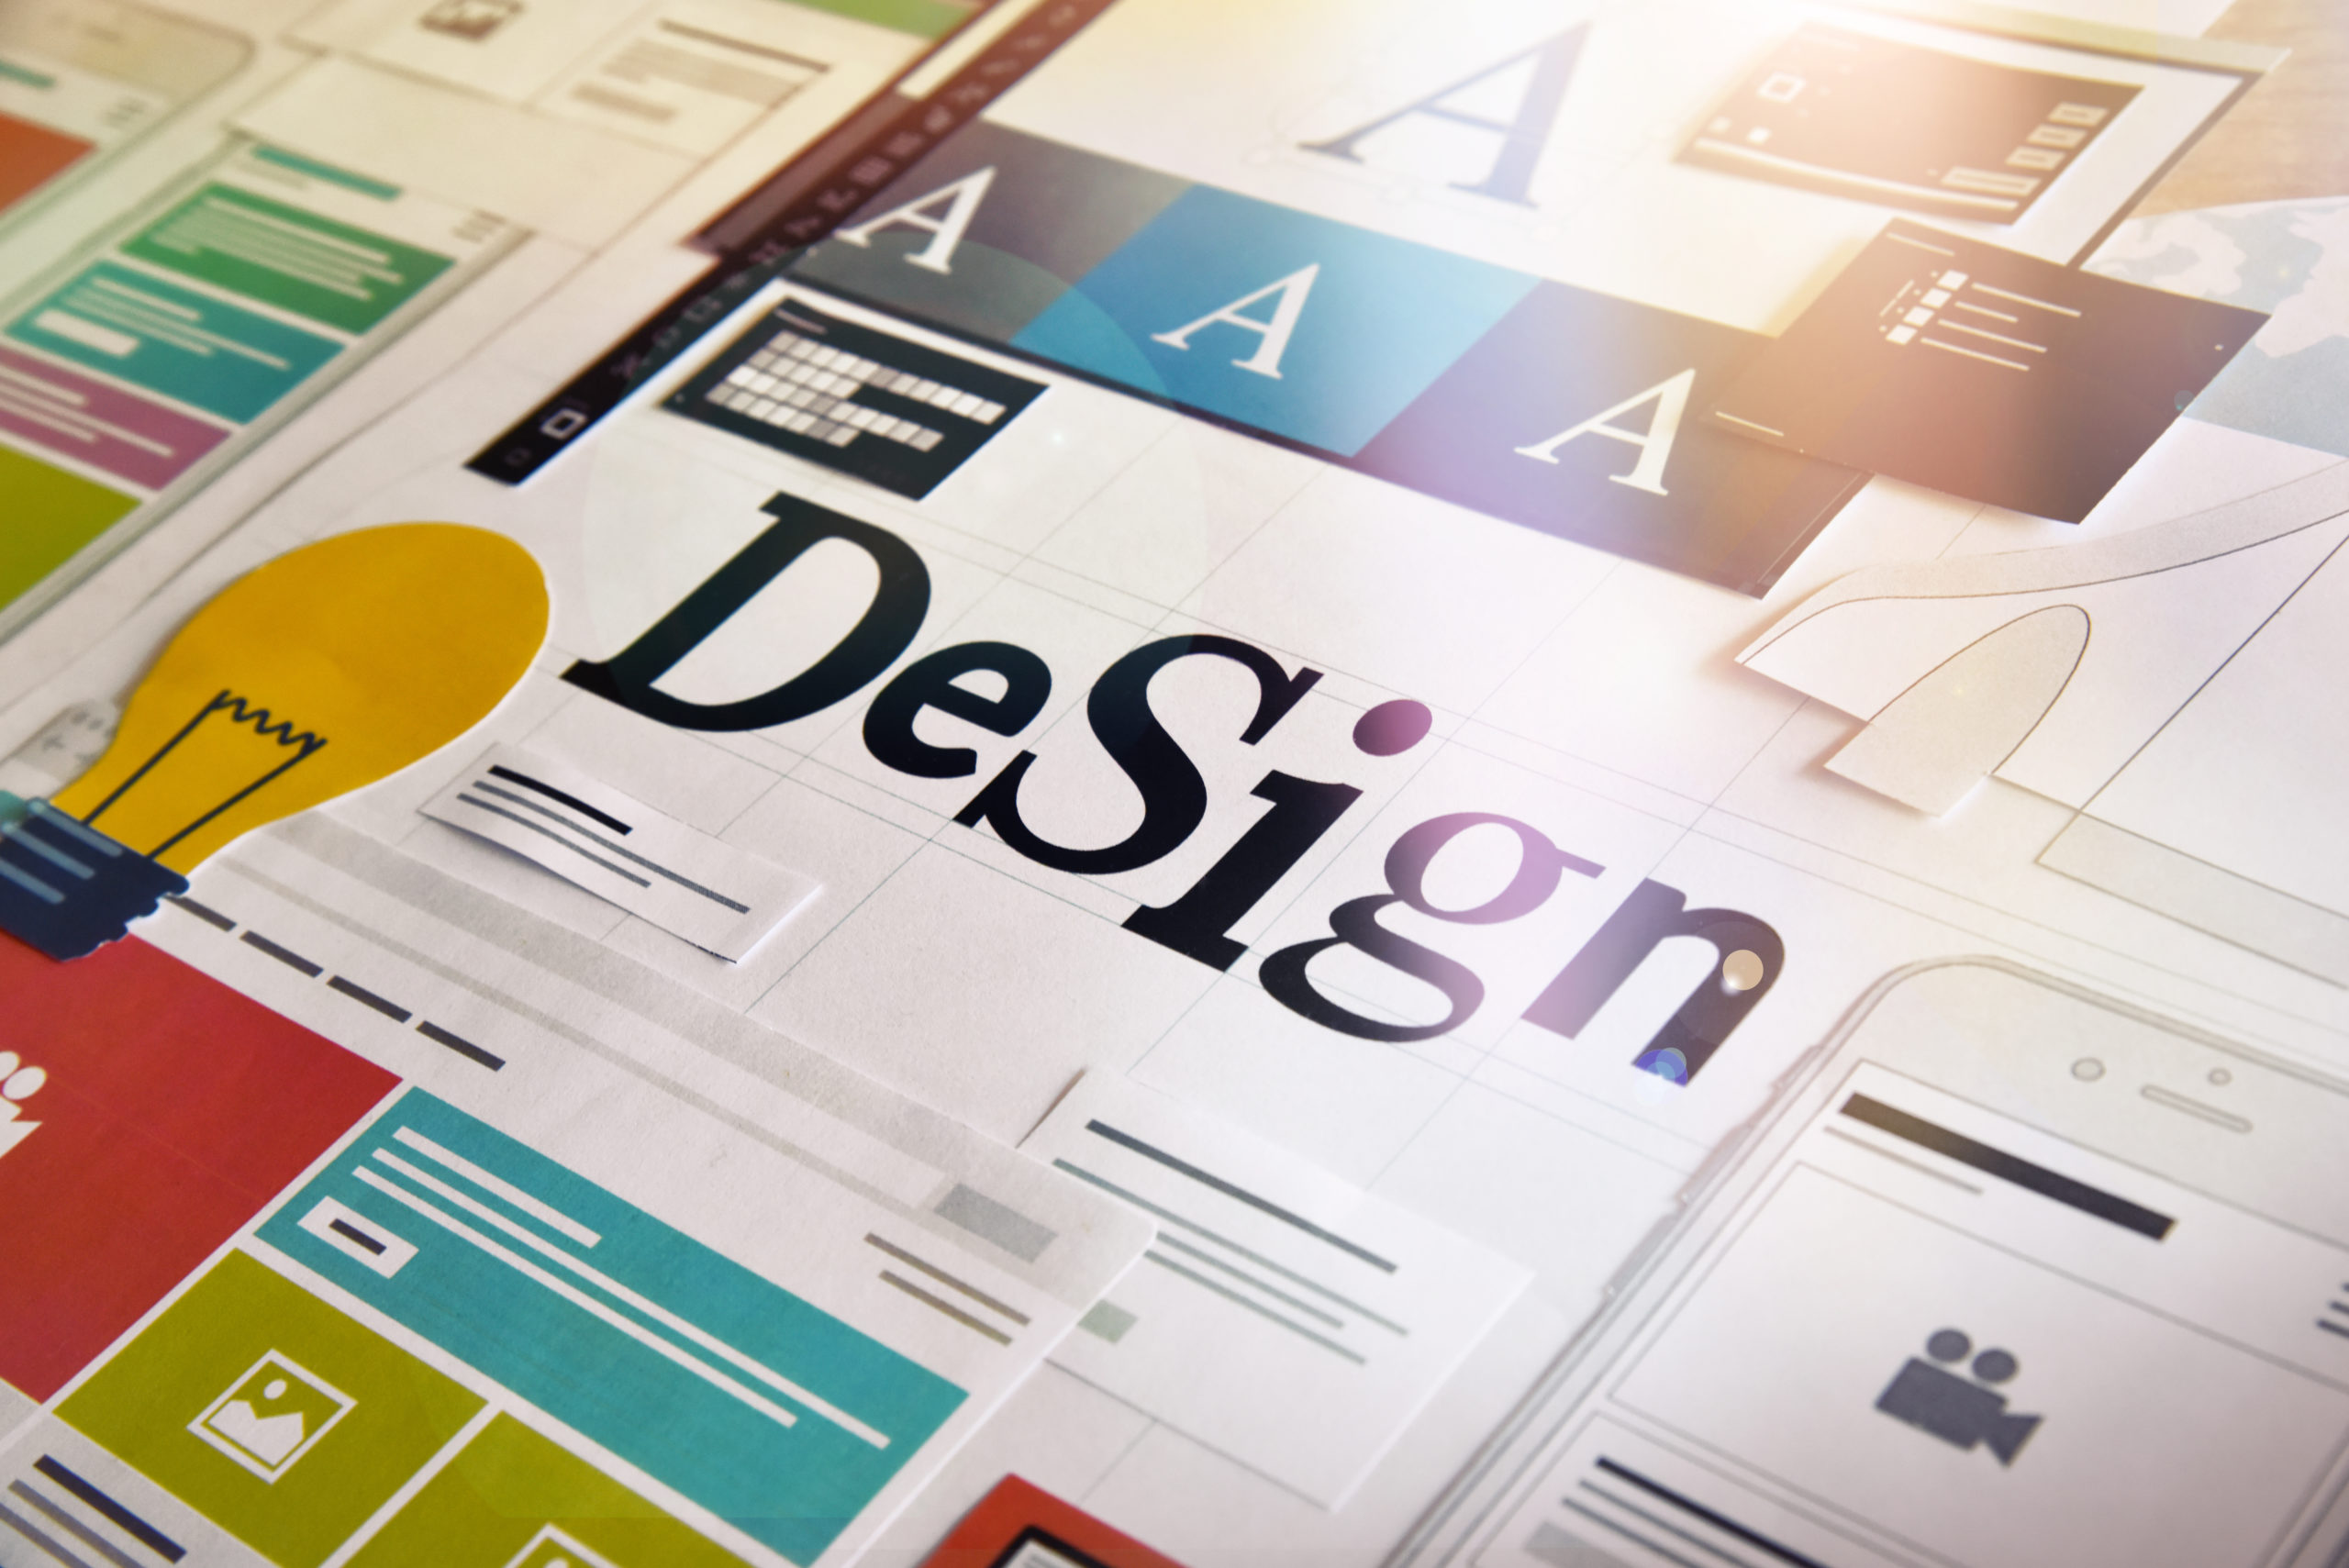 Design concept for different categories of design such as graphic and web design, logo, stationary and product design, company identity, branding, marketing material, mobile app, social media.